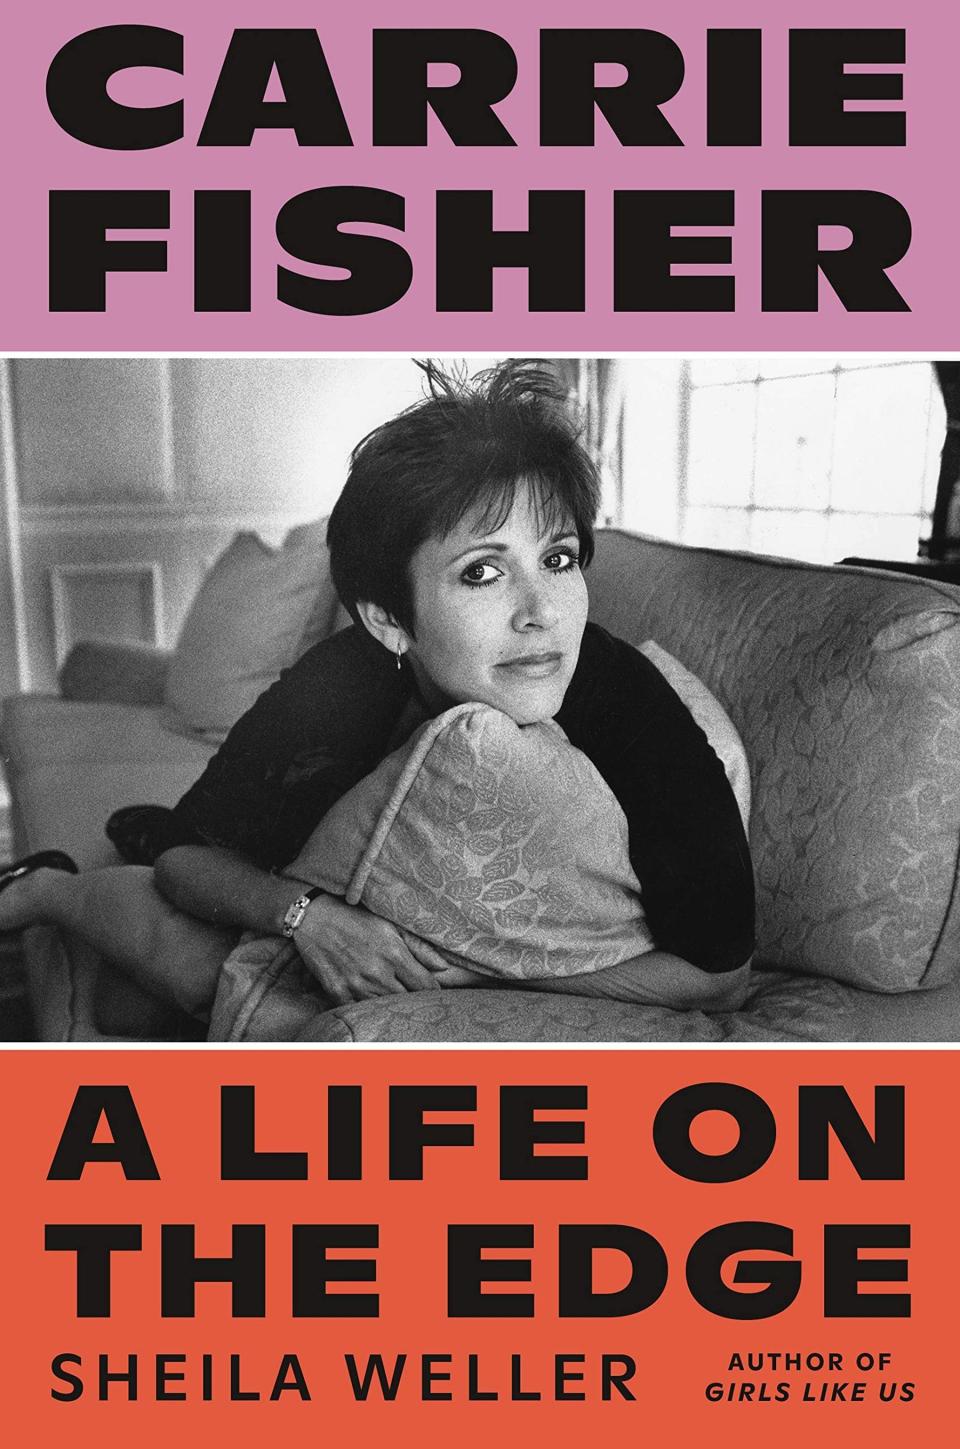 Carrie Fisher: A Life on the Edge , by Sheila Weller